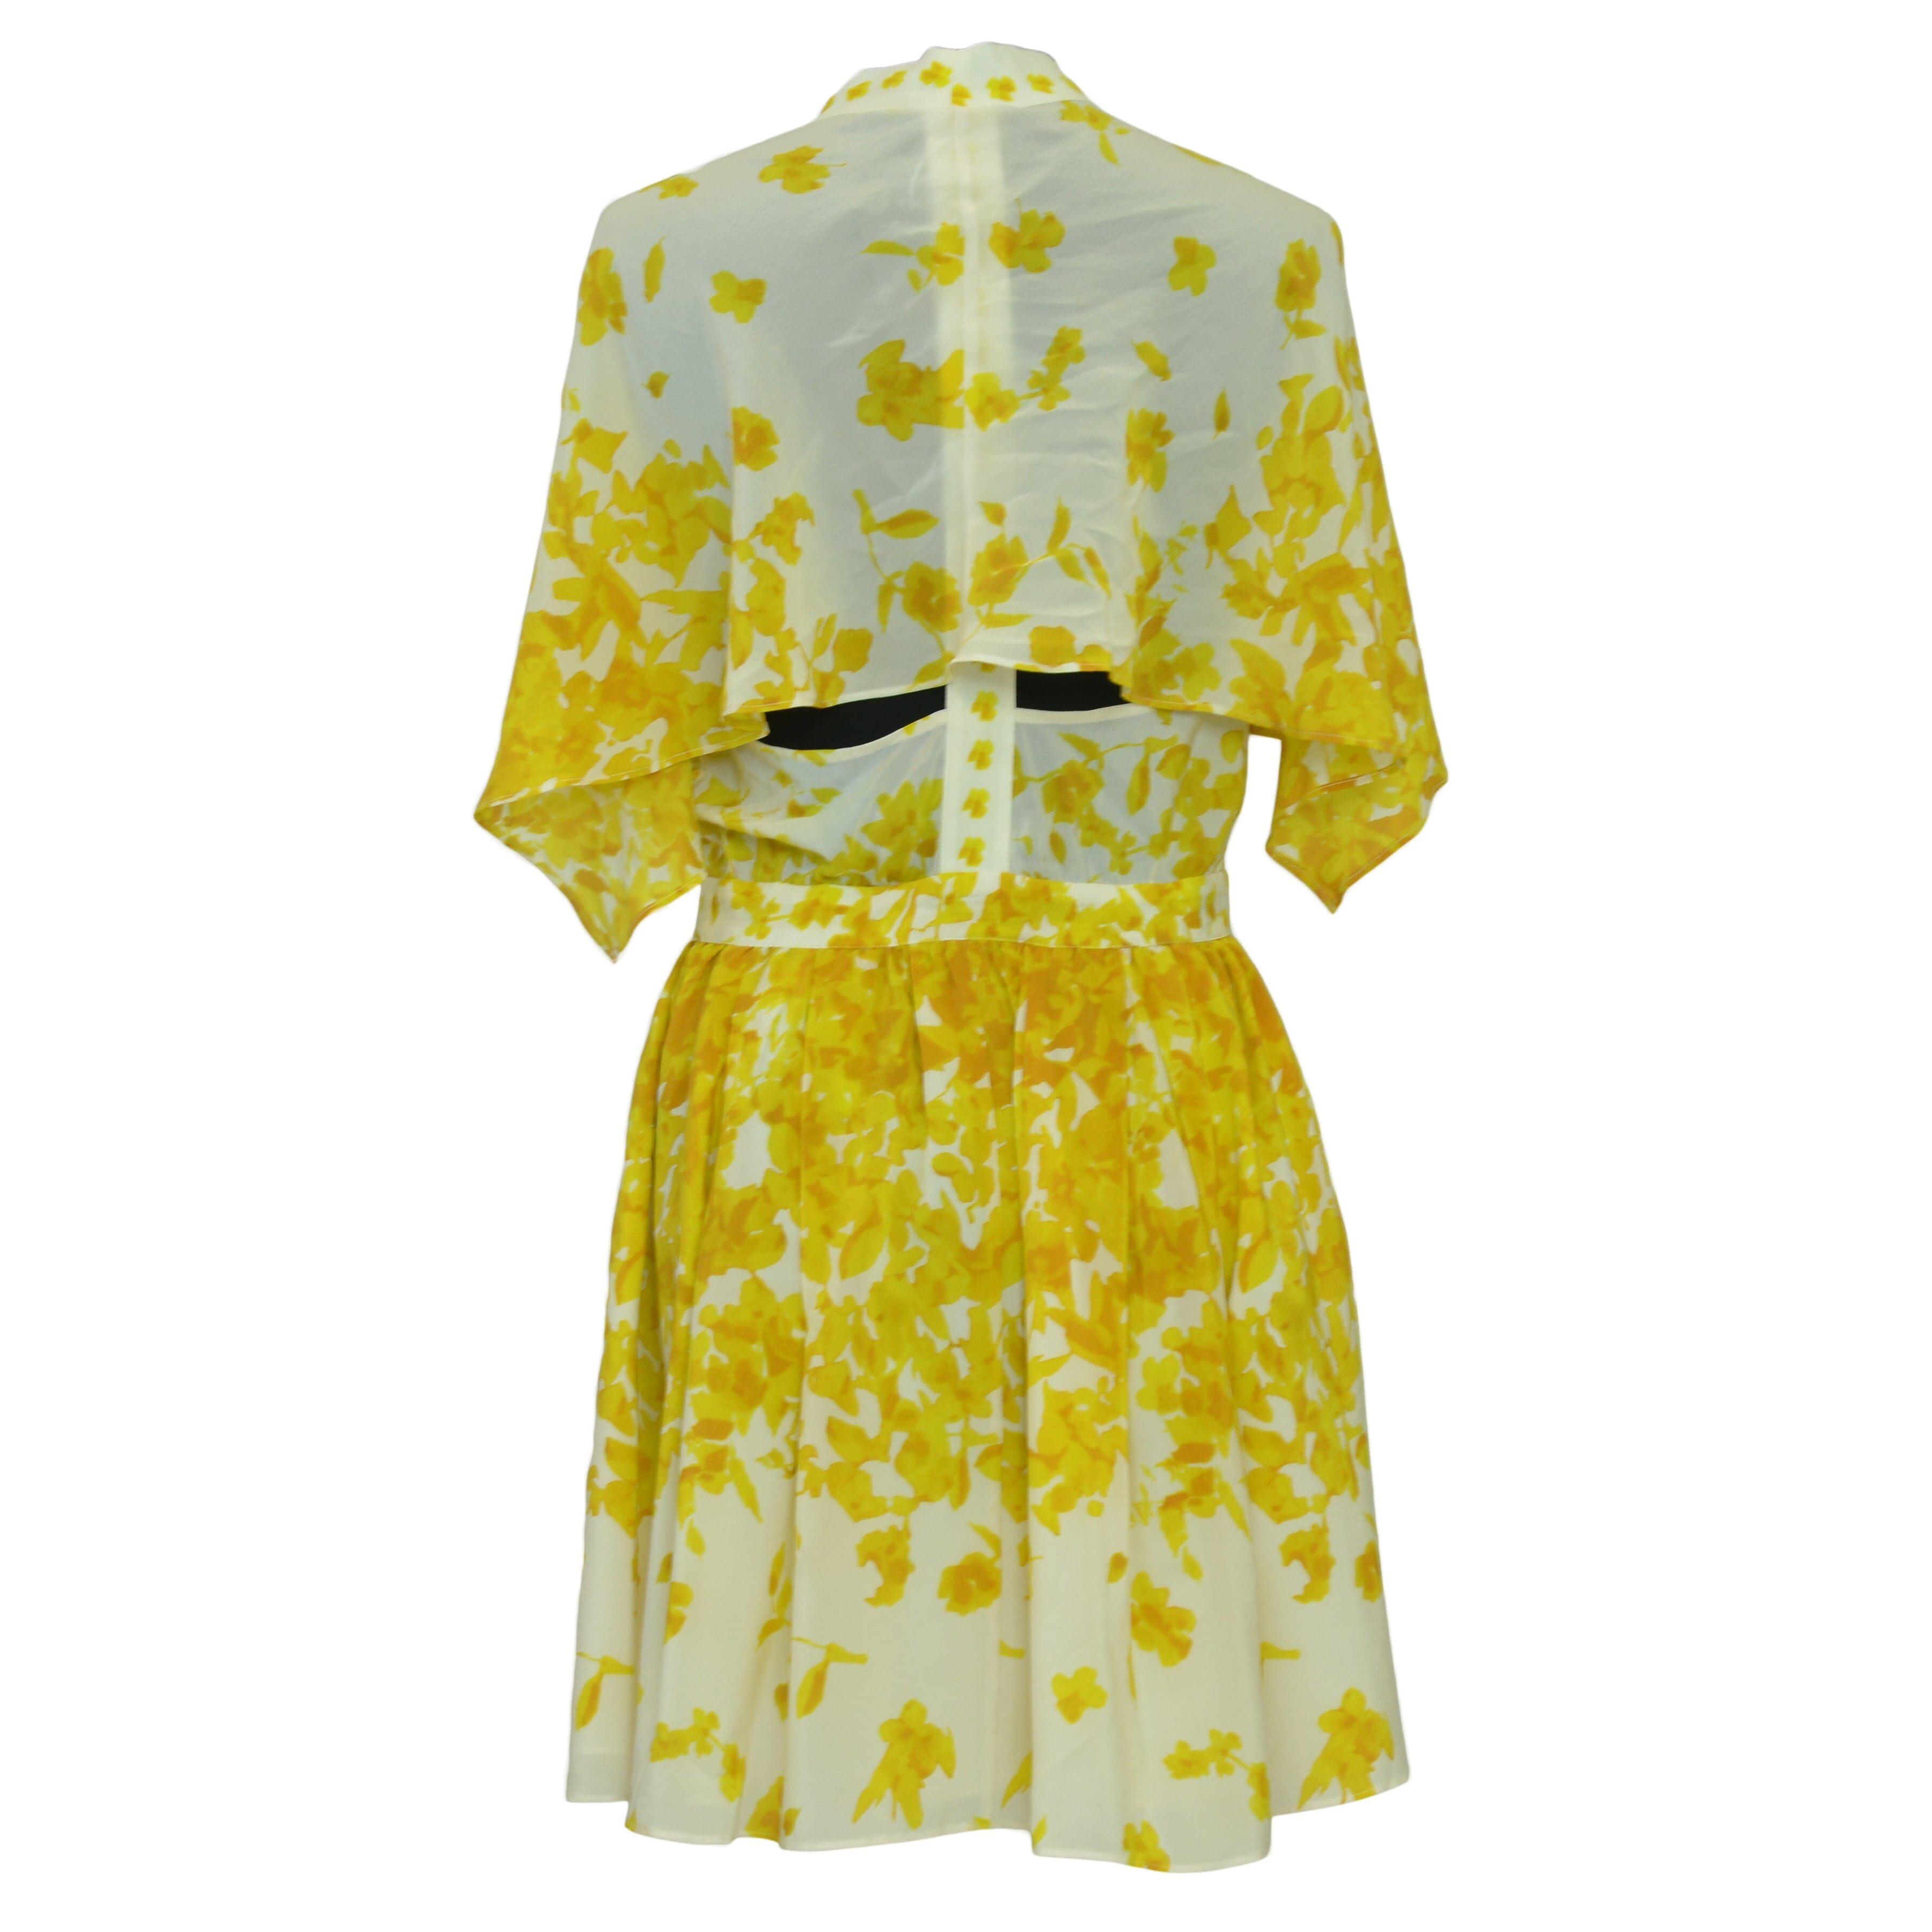 Yellow/White Printed Open Back Dress Clothing Alexis